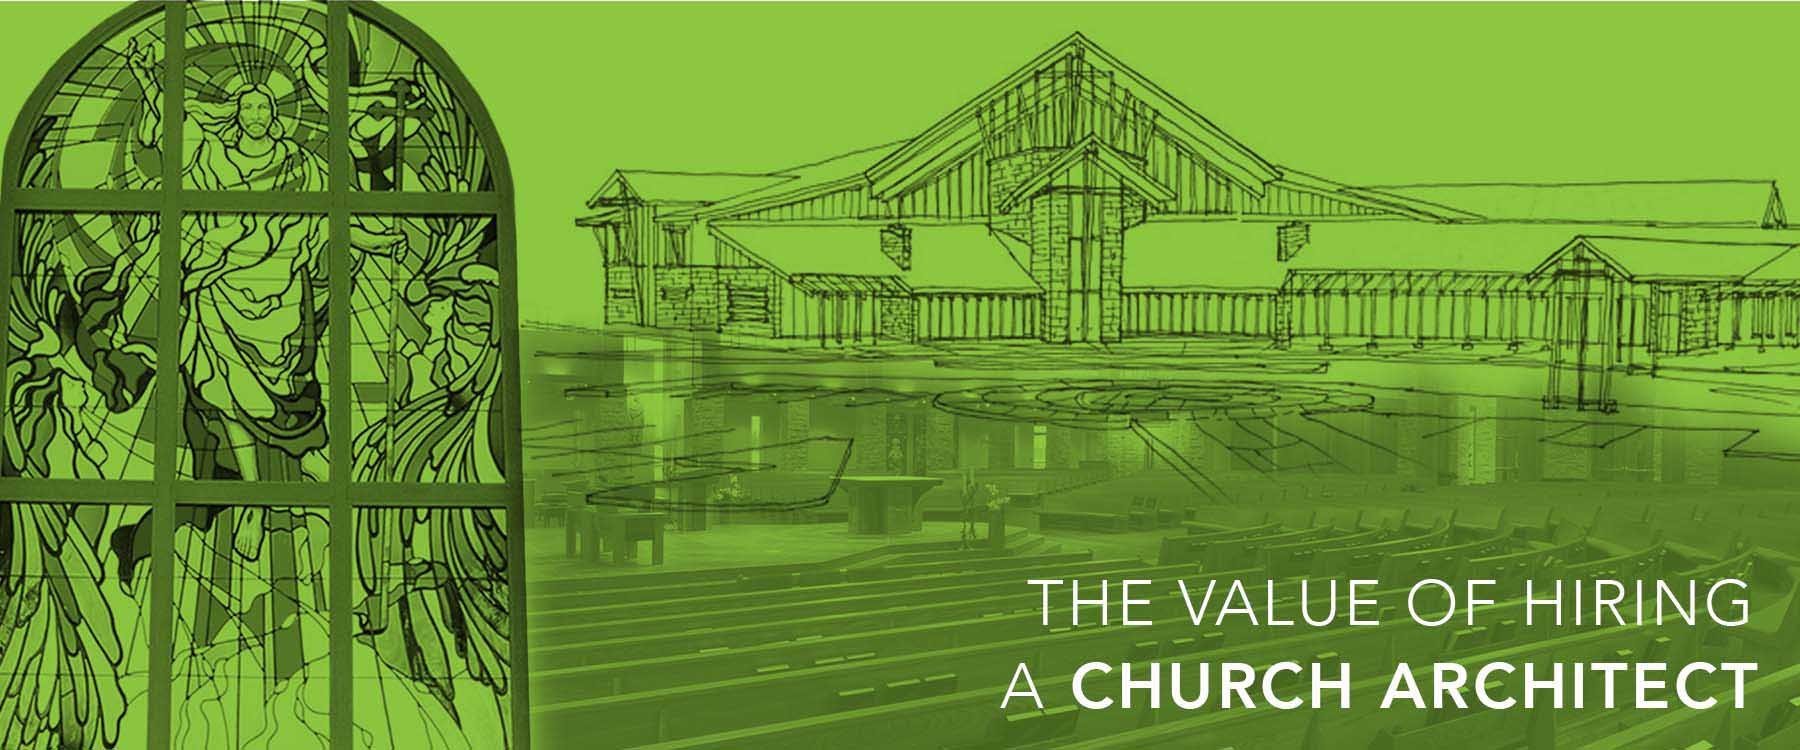 There are many advantages to hiring a church architect. This blog post summarizes several ideas generated by the PRA church design studio.